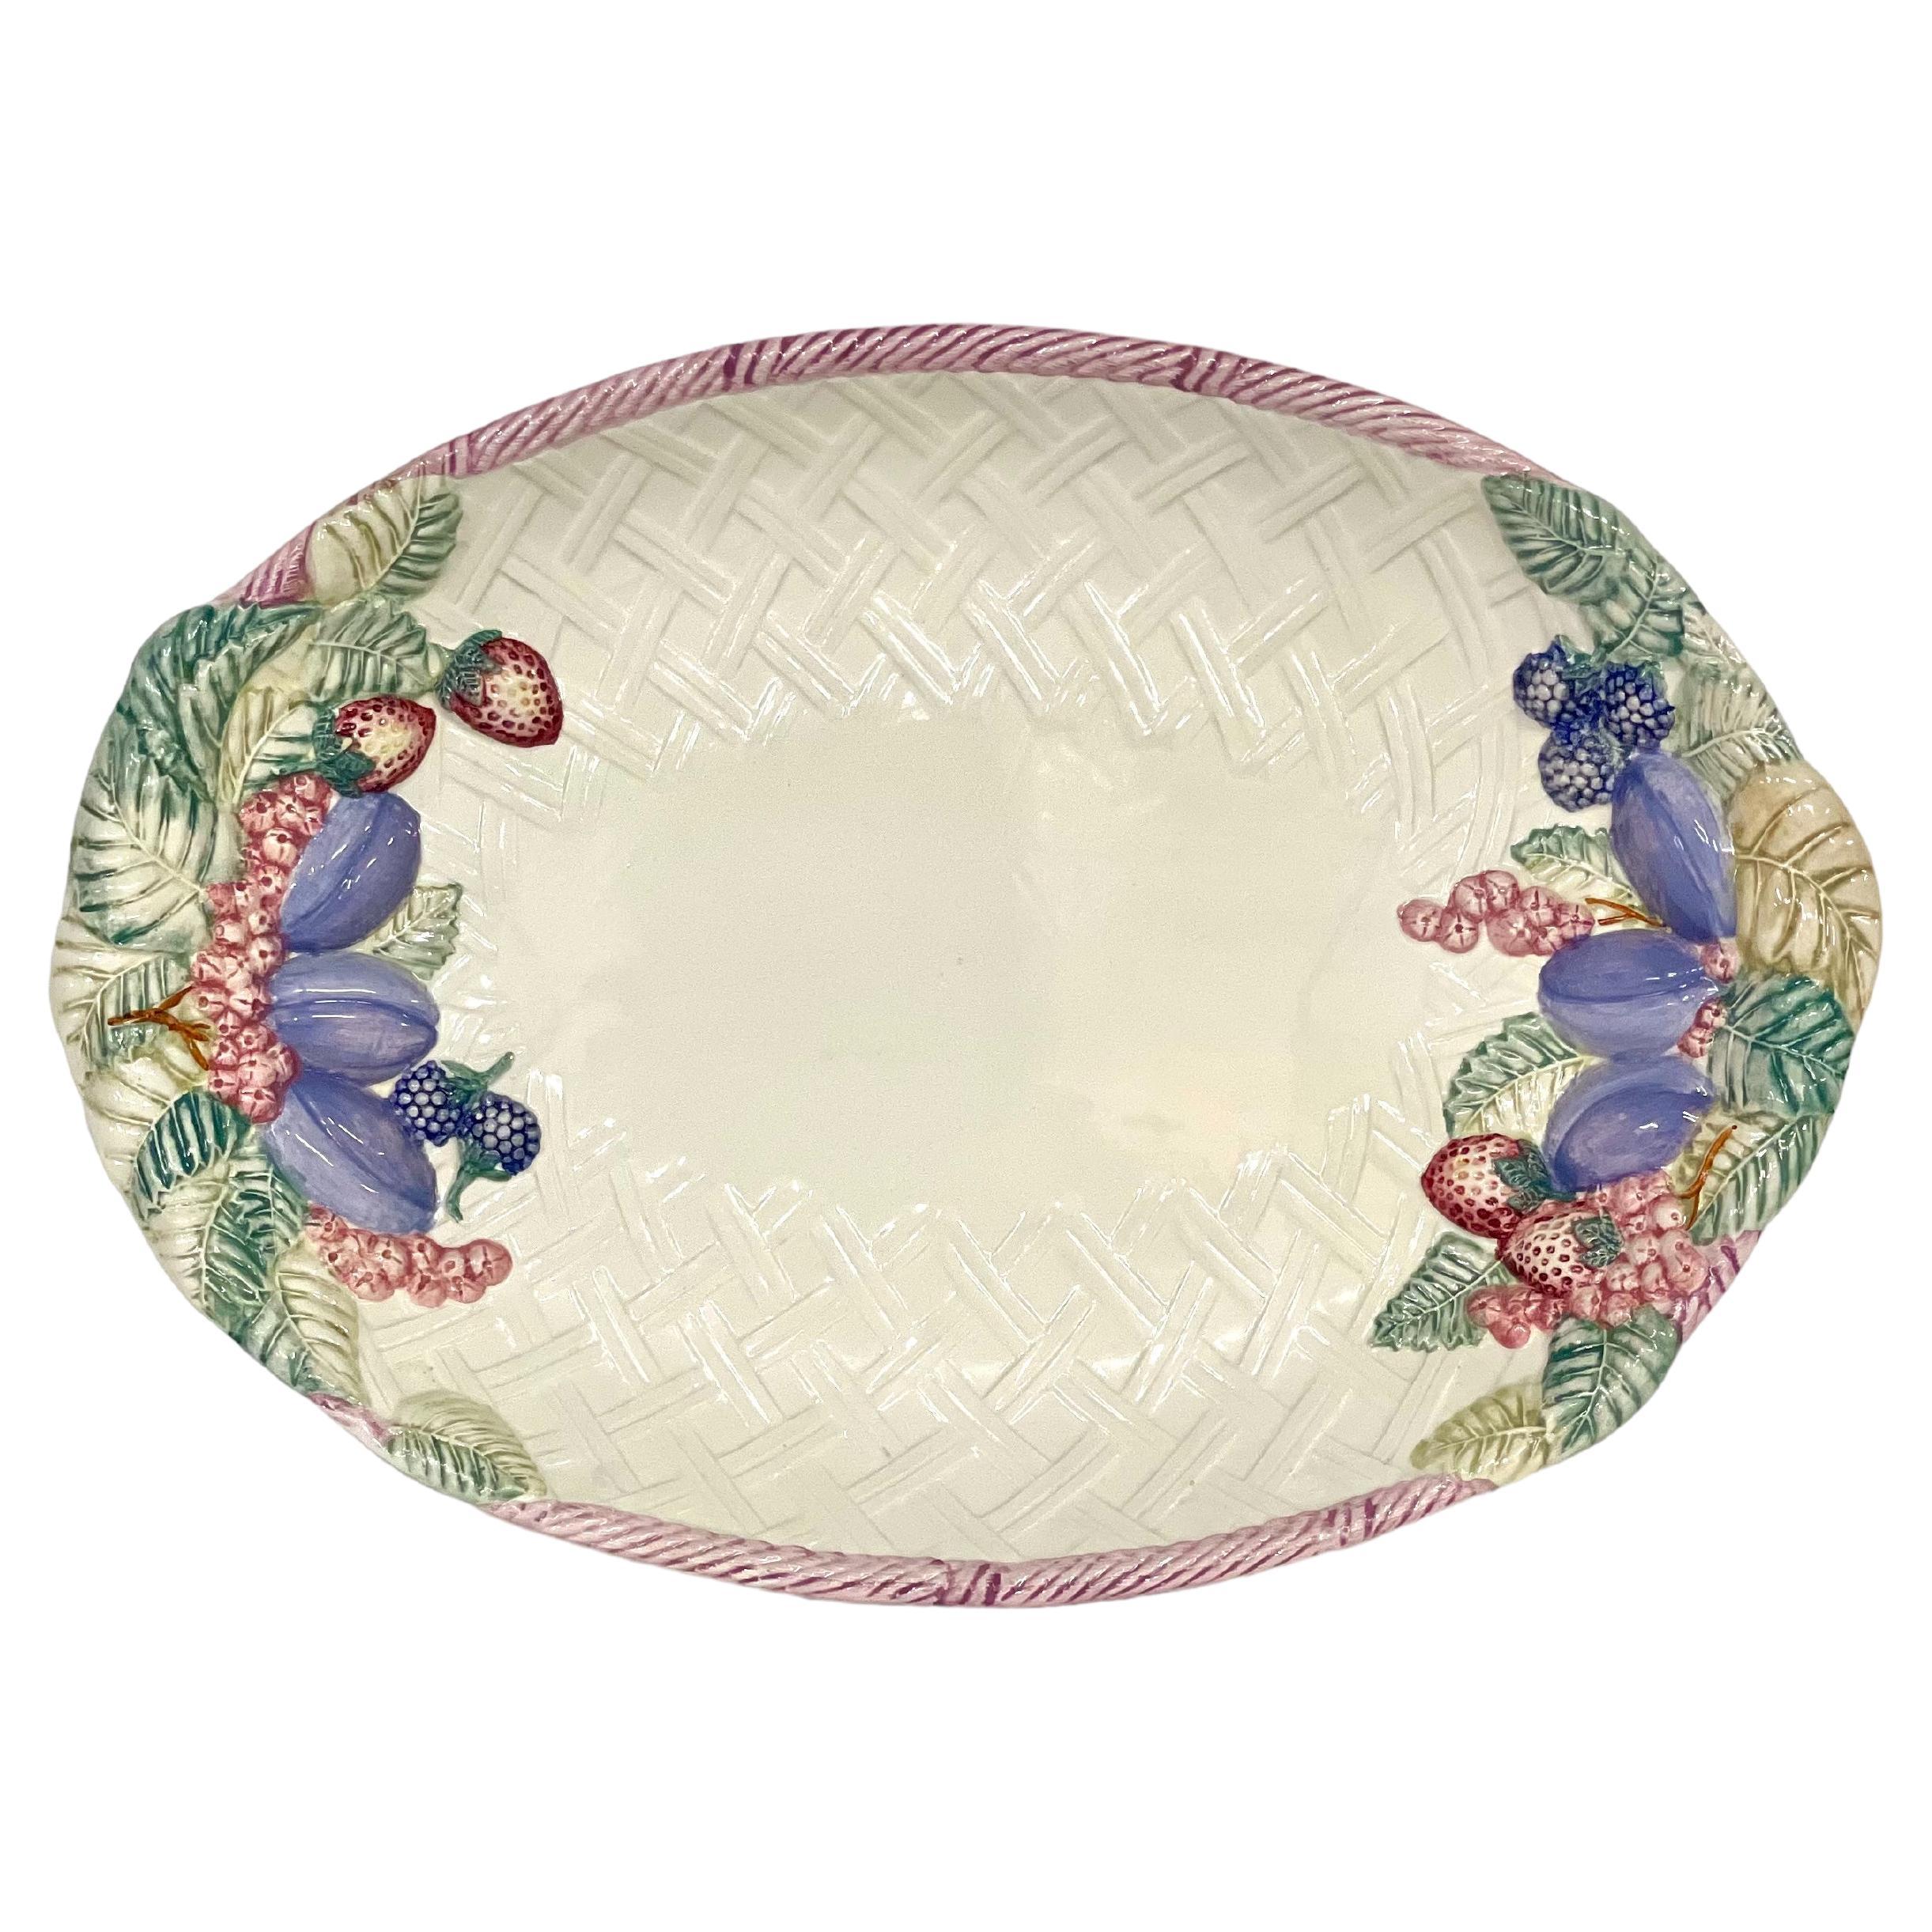 French Majolica Embossed Oval Serving Platter with Decoration of Fruit